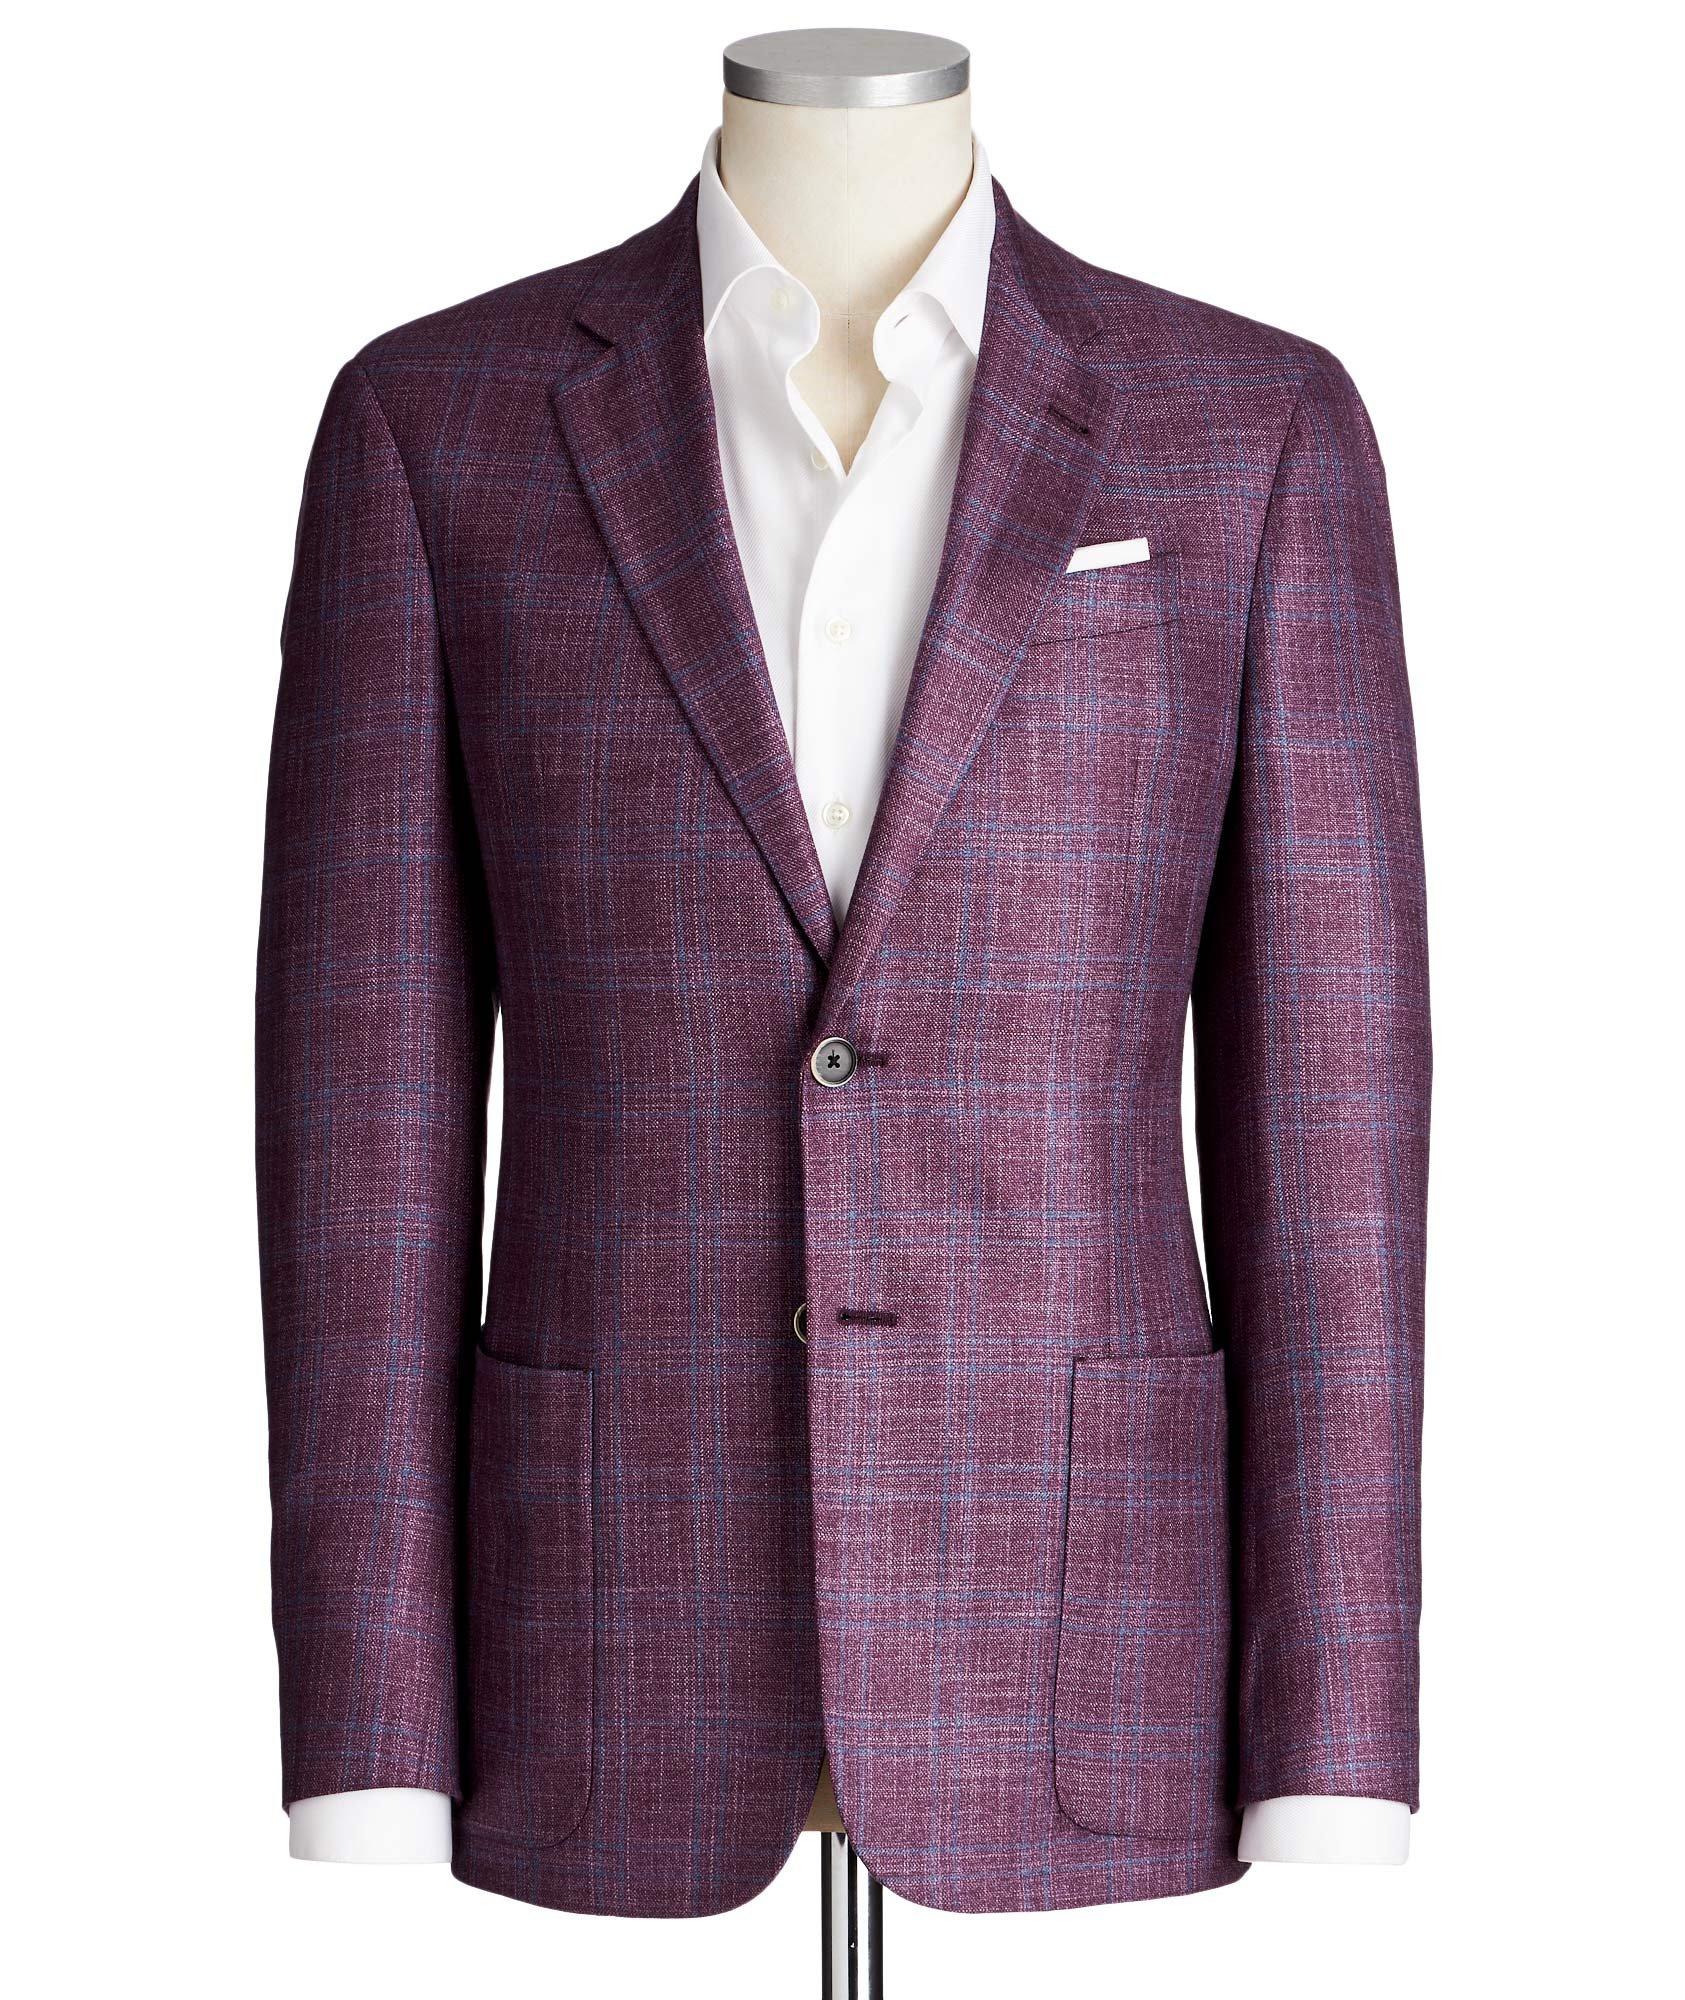 G-Line Deco Checked Sports Jacket image 0